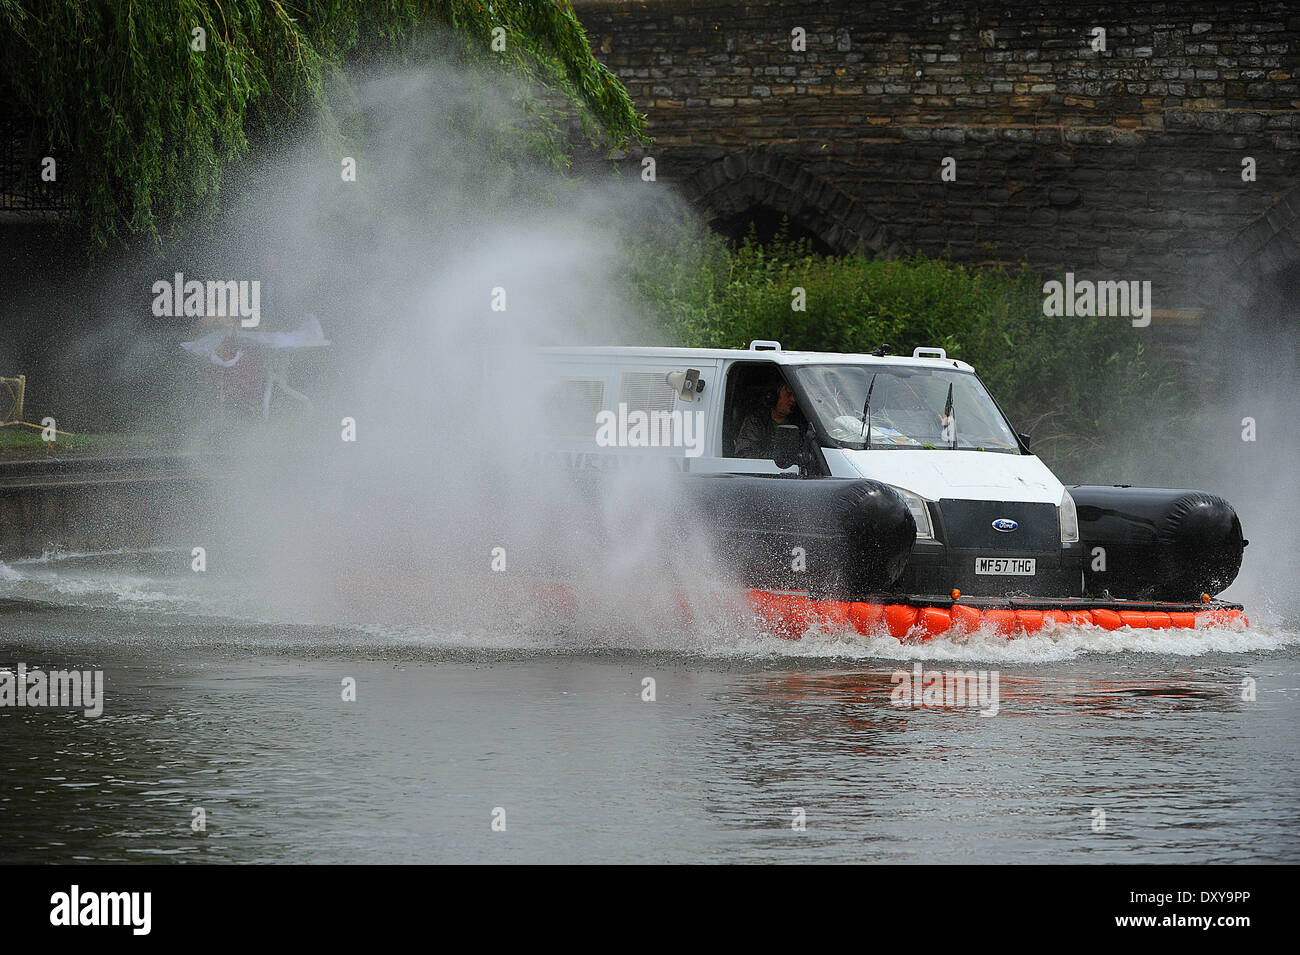 BBC Top Gear presenters Jeremy Clarkson, Richard Hammond and James May  pilot a hovercraft made from a van on the river Avon Stock Photo - Alamy